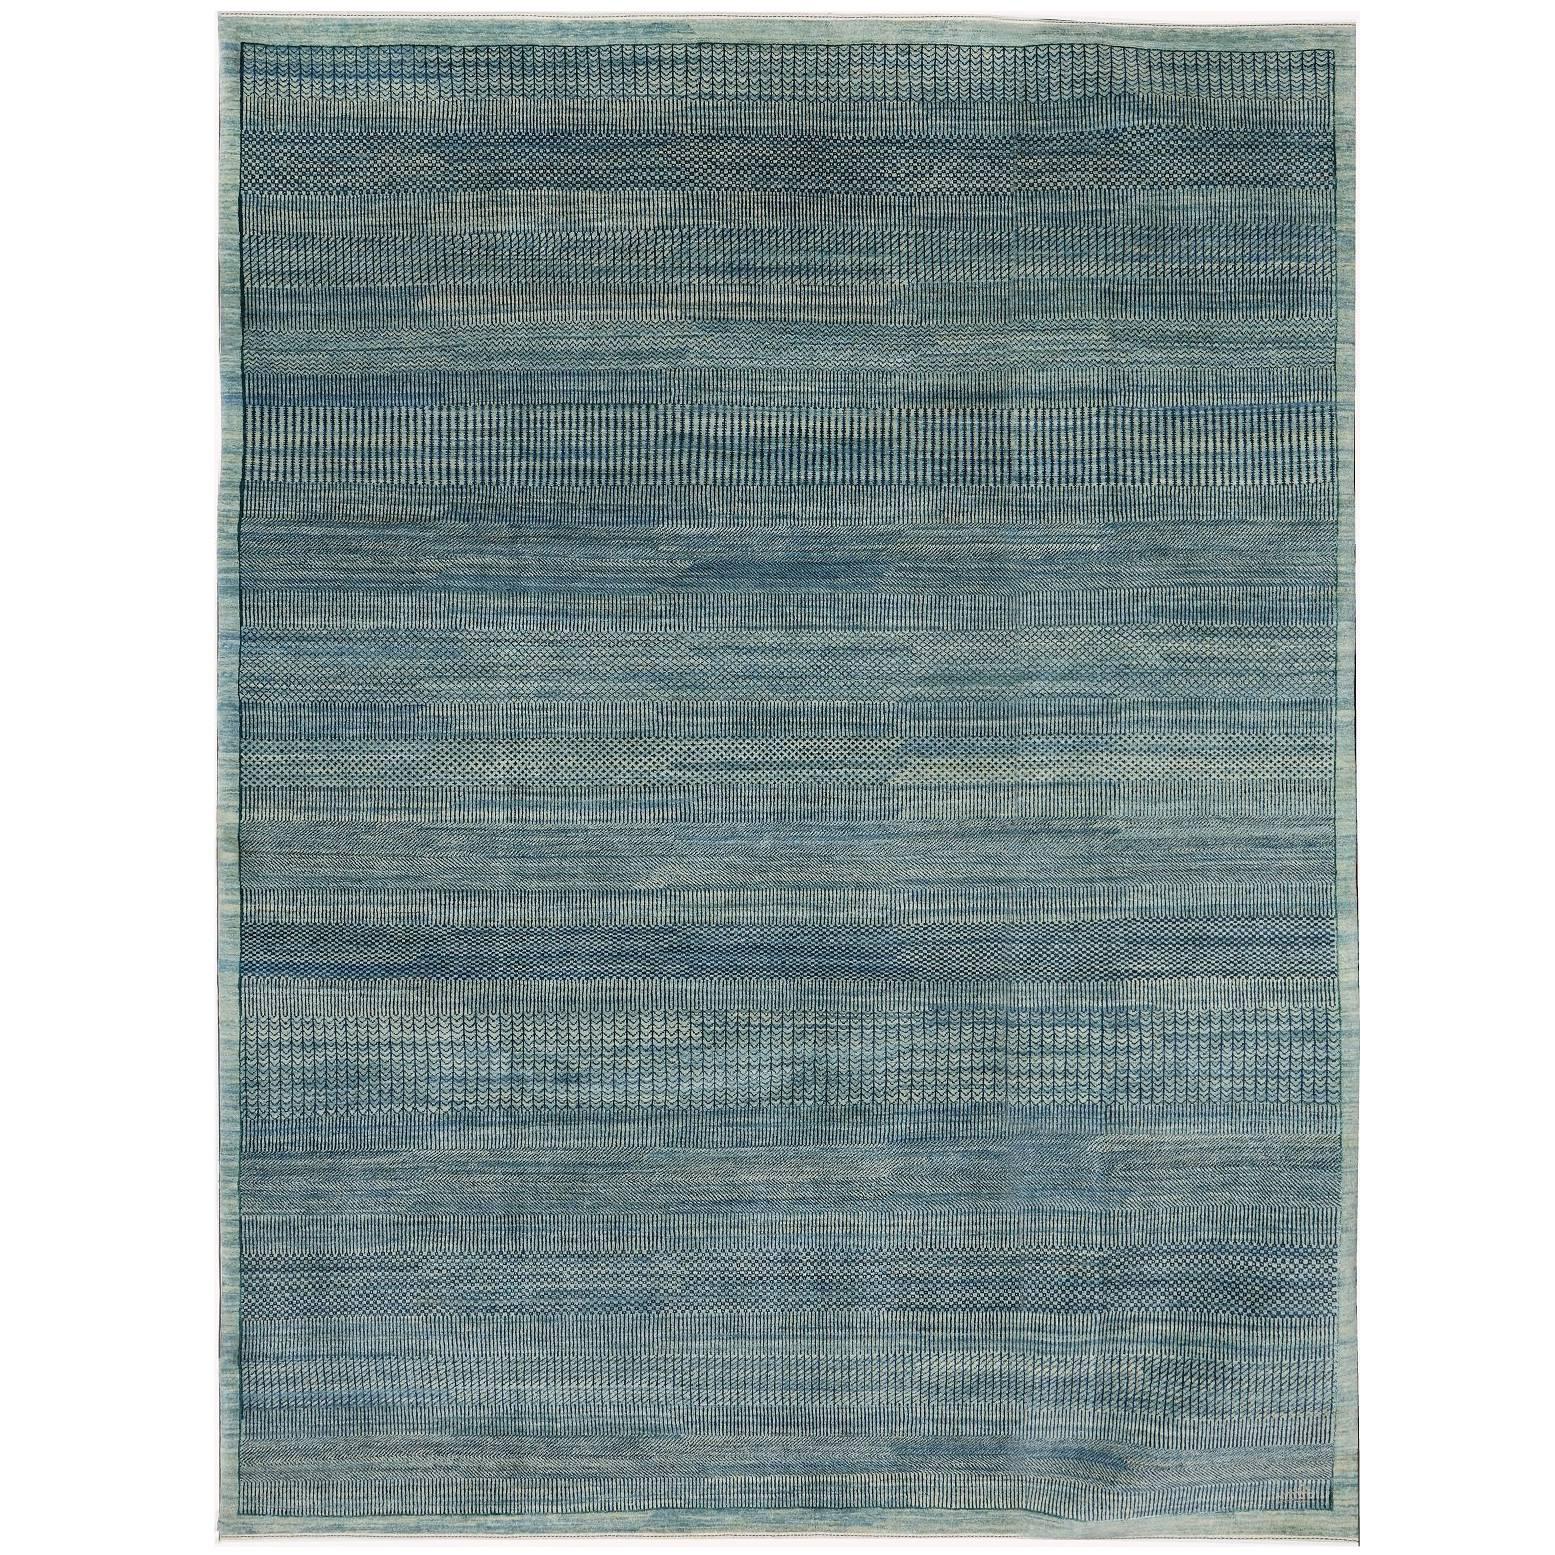 Blue Contemporary Contemporary Rug, Hand-knotted, Wool, 9' x 12' (tapis persan contemporain bleu)